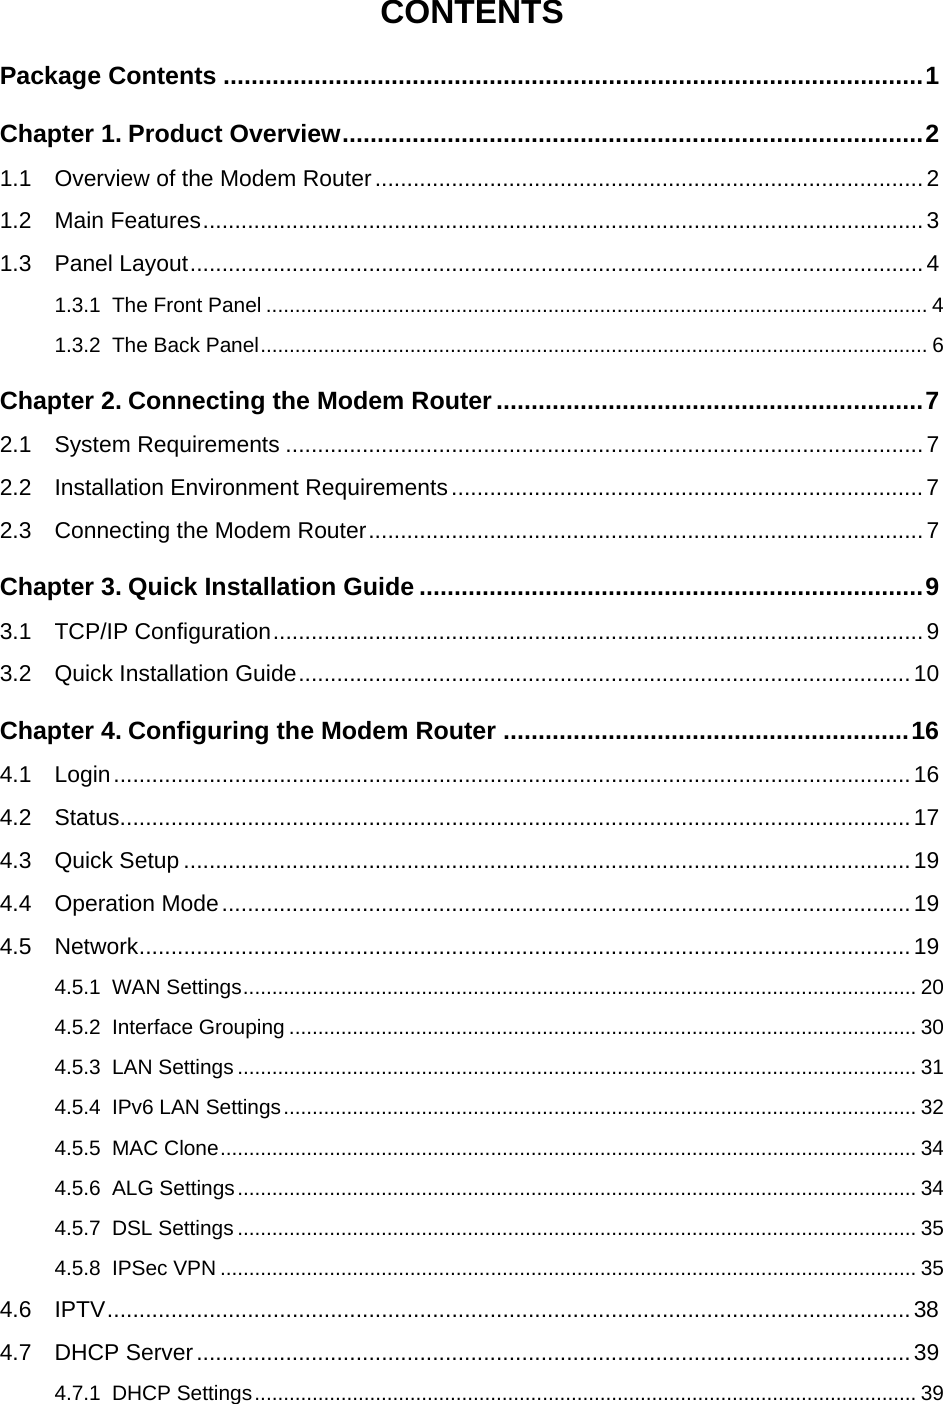  CONTENTS Package Contents ....................................................................................................1 Chapter 1. Product Overview...................................................................................2 1.1 Overview of the Modem Router......................................................................................2 1.2 Main Features.................................................................................................................3 1.3 Panel Layout................................................................................................................... 4 1.3.1 The Front Panel ................................................................................................................... 4 1.3.2 The Back Panel.................................................................................................................... 6 Chapter 2. Connecting the Modem Router.............................................................7 2.1 System Requirements ....................................................................................................7 2.2 Installation Environment Requirements .......................................................................... 7 2.3 Connecting the Modem Router.......................................................................................7 Chapter 3. Quick Installation Guide ........................................................................9 3.1 TCP/IP Configuration......................................................................................................9 3.2 Quick Installation Guide................................................................................................ 10 Chapter 4. Configuring the Modem Router ..........................................................16 4.1 Login............................................................................................................................. 16 4.2 Status............................................................................................................................17 4.3 Quick Setup ..................................................................................................................19 4.4 Operation Mode............................................................................................................ 19 4.5 Network......................................................................................................................... 19 4.5.1 WAN Settings..................................................................................................................... 20 4.5.2 Interface Grouping ............................................................................................................. 30 4.5.3 LAN Settings ...................................................................................................................... 31 4.5.4 IPv6 LAN Settings.............................................................................................................. 32 4.5.5 MAC Clone......................................................................................................................... 34 4.5.6 ALG Settings...................................................................................................................... 34 4.5.7 DSL Settings ...................................................................................................................... 35 4.5.8 IPSec VPN ......................................................................................................................... 35 4.6 IPTV.............................................................................................................................. 38 4.7 DHCP Server................................................................................................................39 4.7.1 DHCP Settings................................................................................................................... 39  